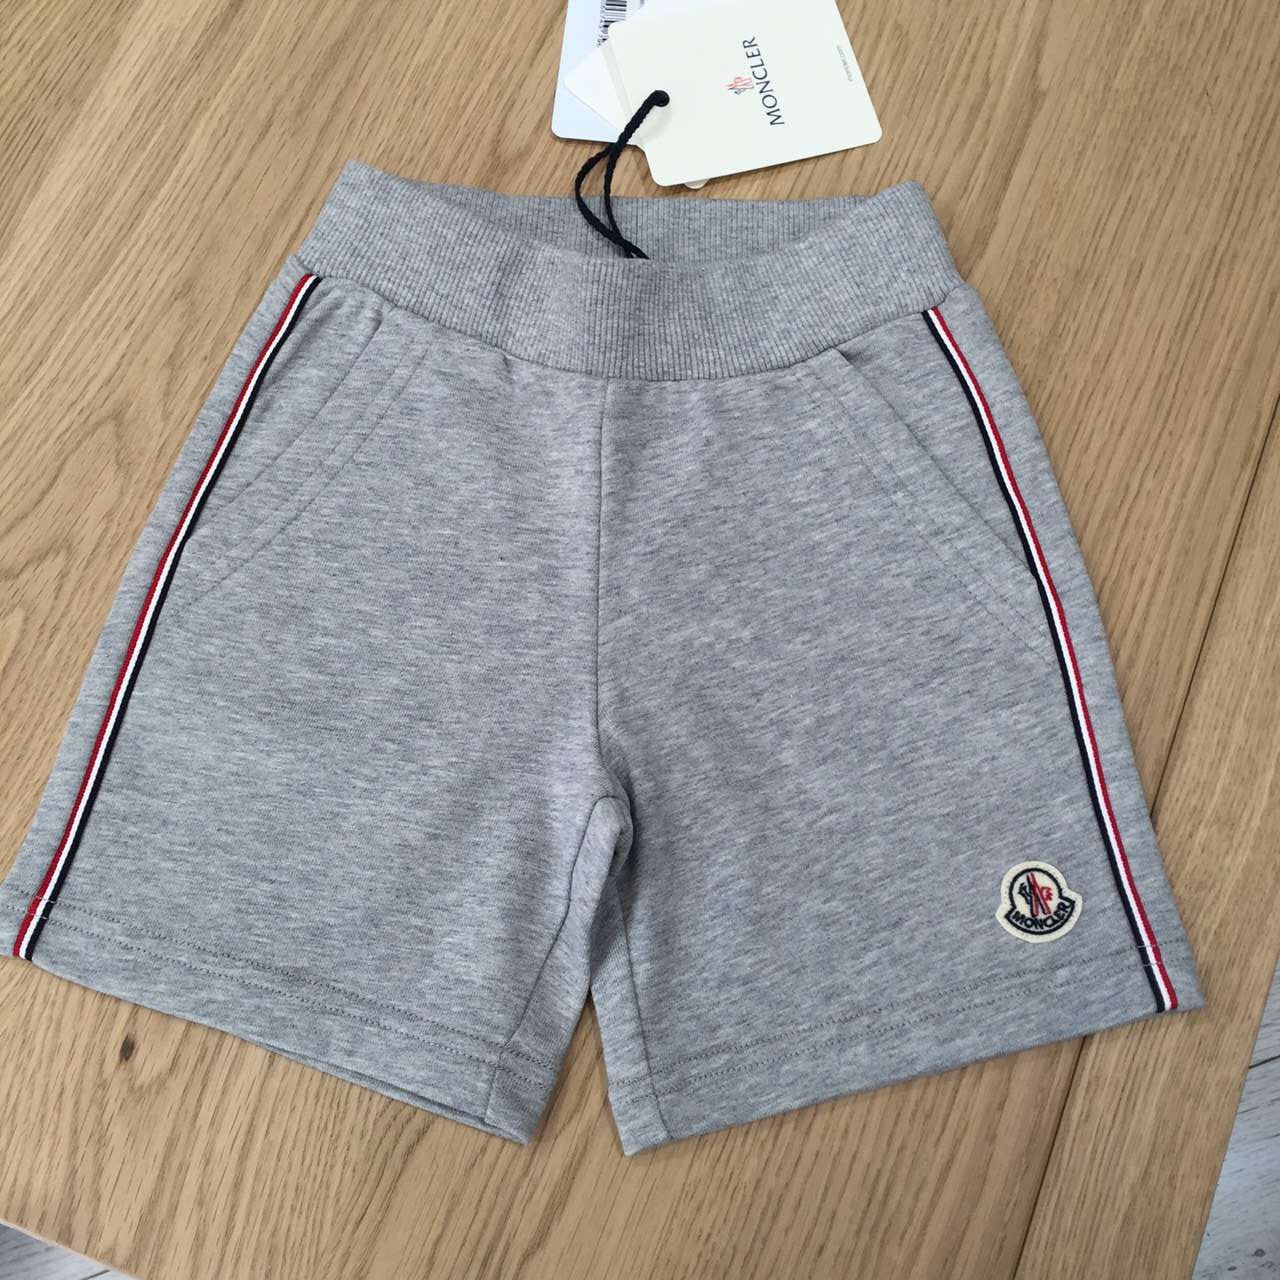 Boys Grey Cotton Short With Red Striped Trims - CÉMAROSE | Children's Fashion Store